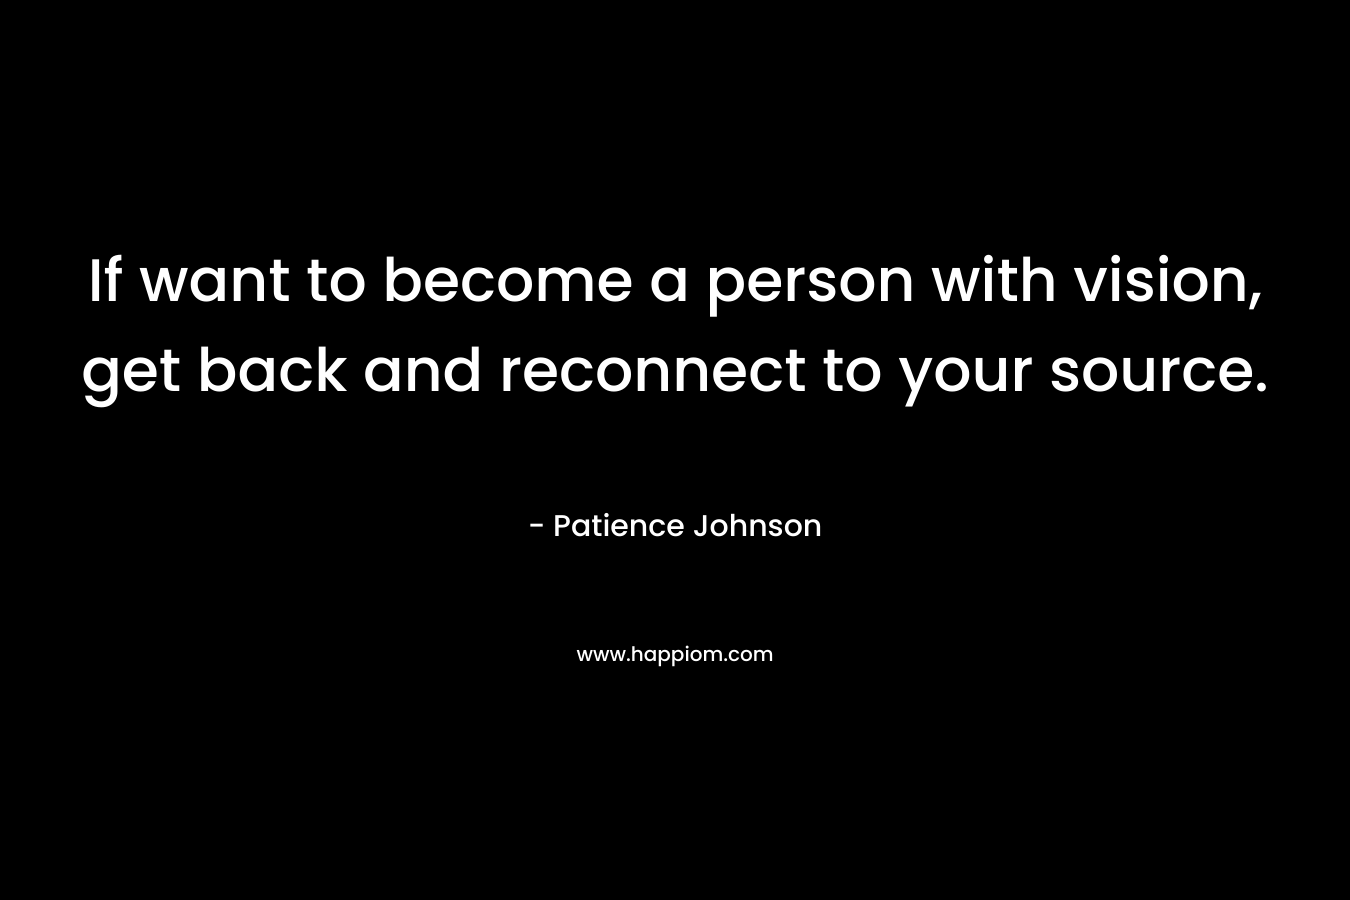 If want to become a person with vision, get back and reconnect to your source. – Patience Johnson